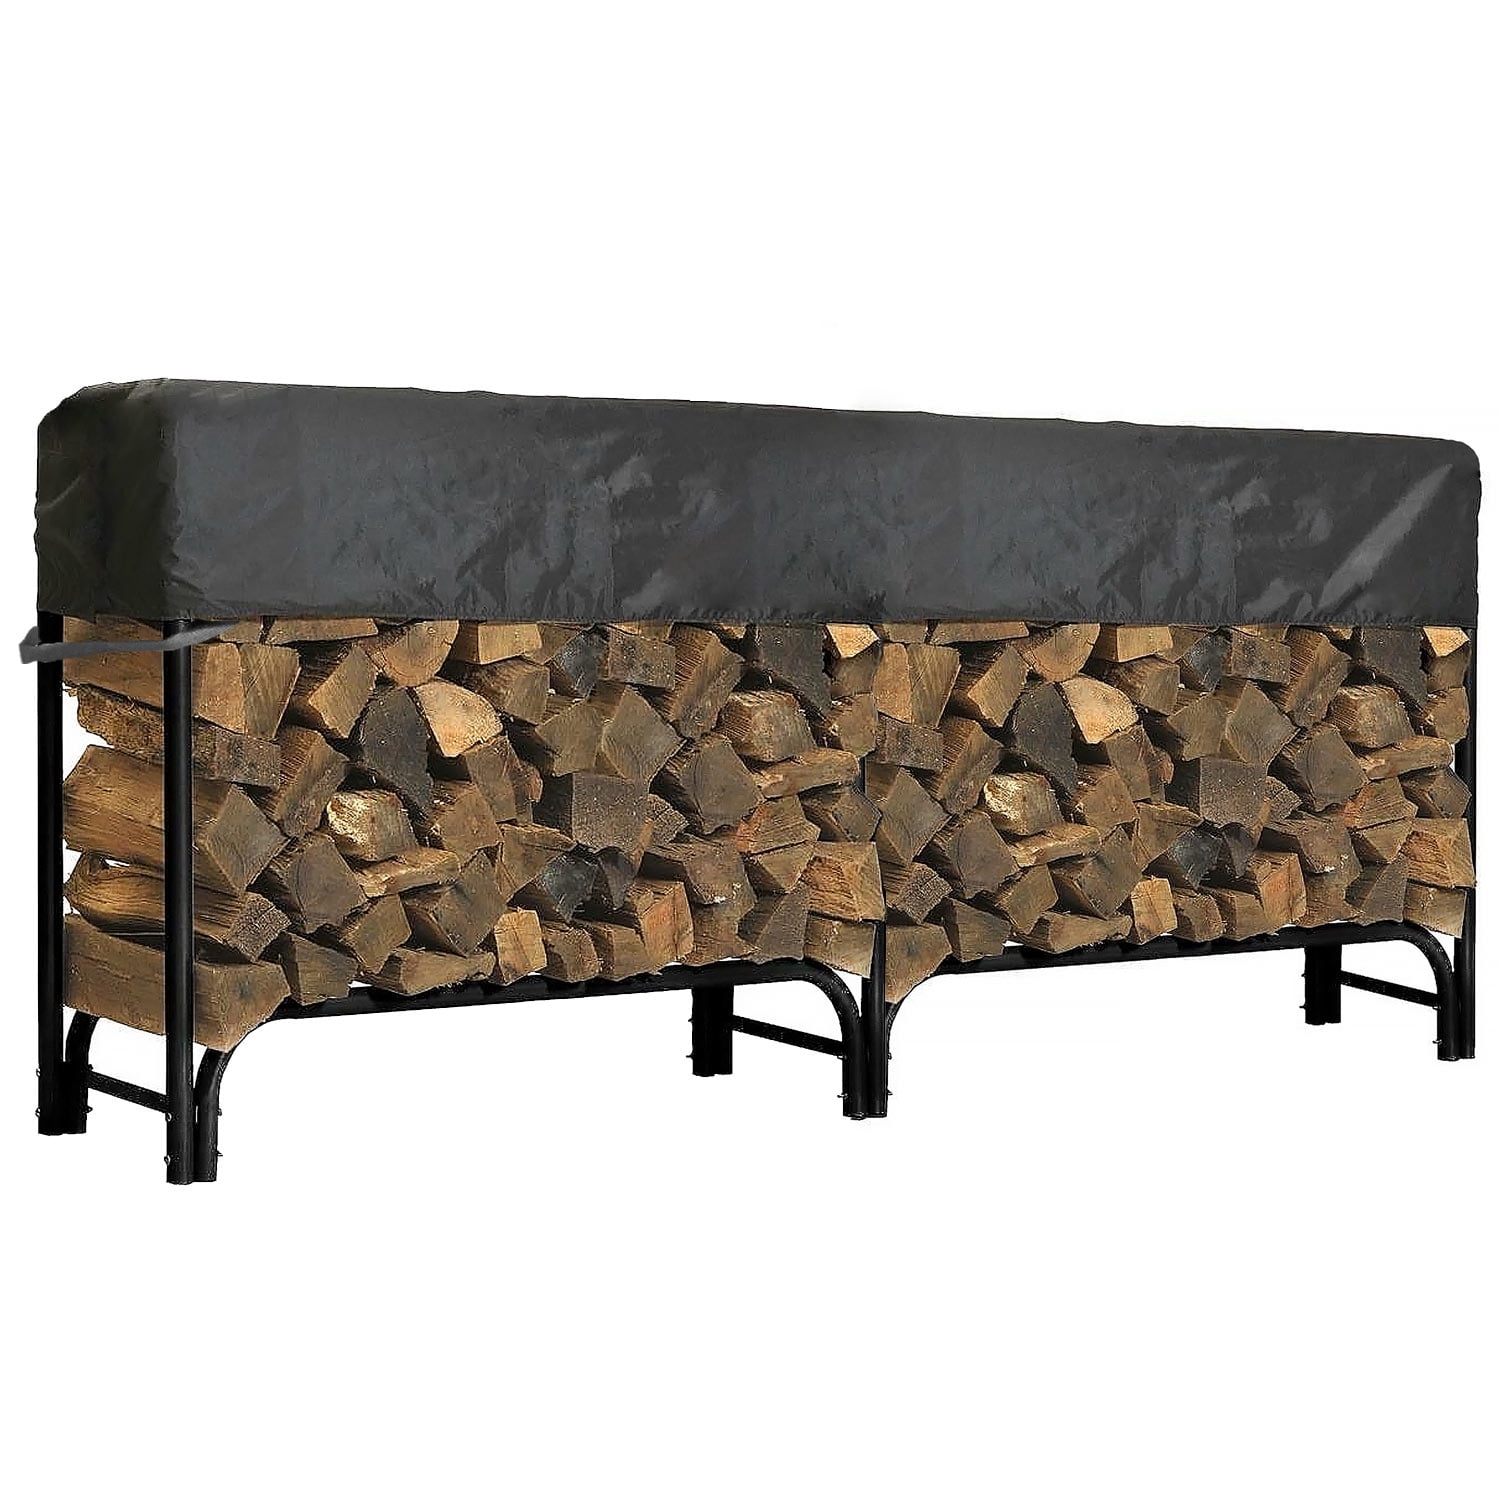 North East Harbor Outdoor Firewood Log Rack Cover - 97